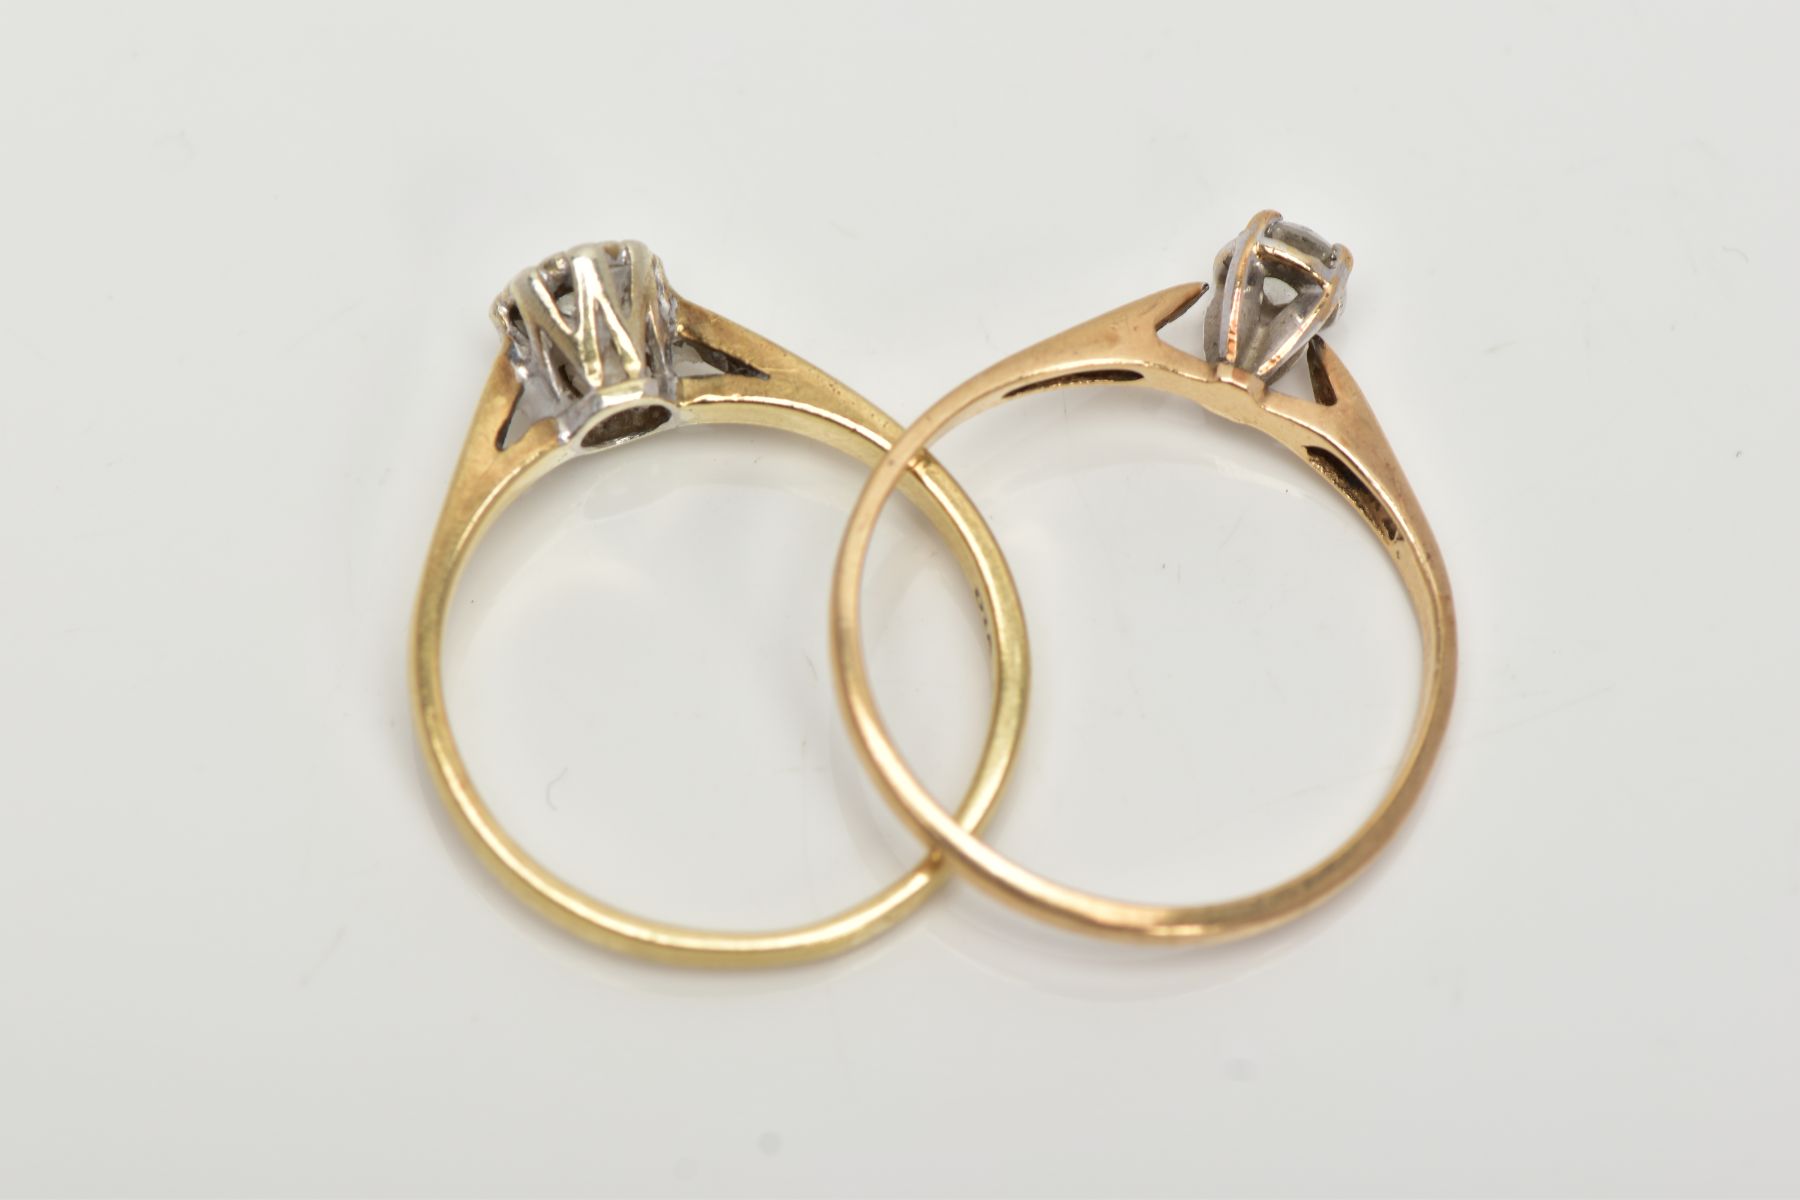 TWO SINGLE STONE DIAMOND RINGS, the first designed with an illusion set round brilliant cut diamond, - Image 3 of 4